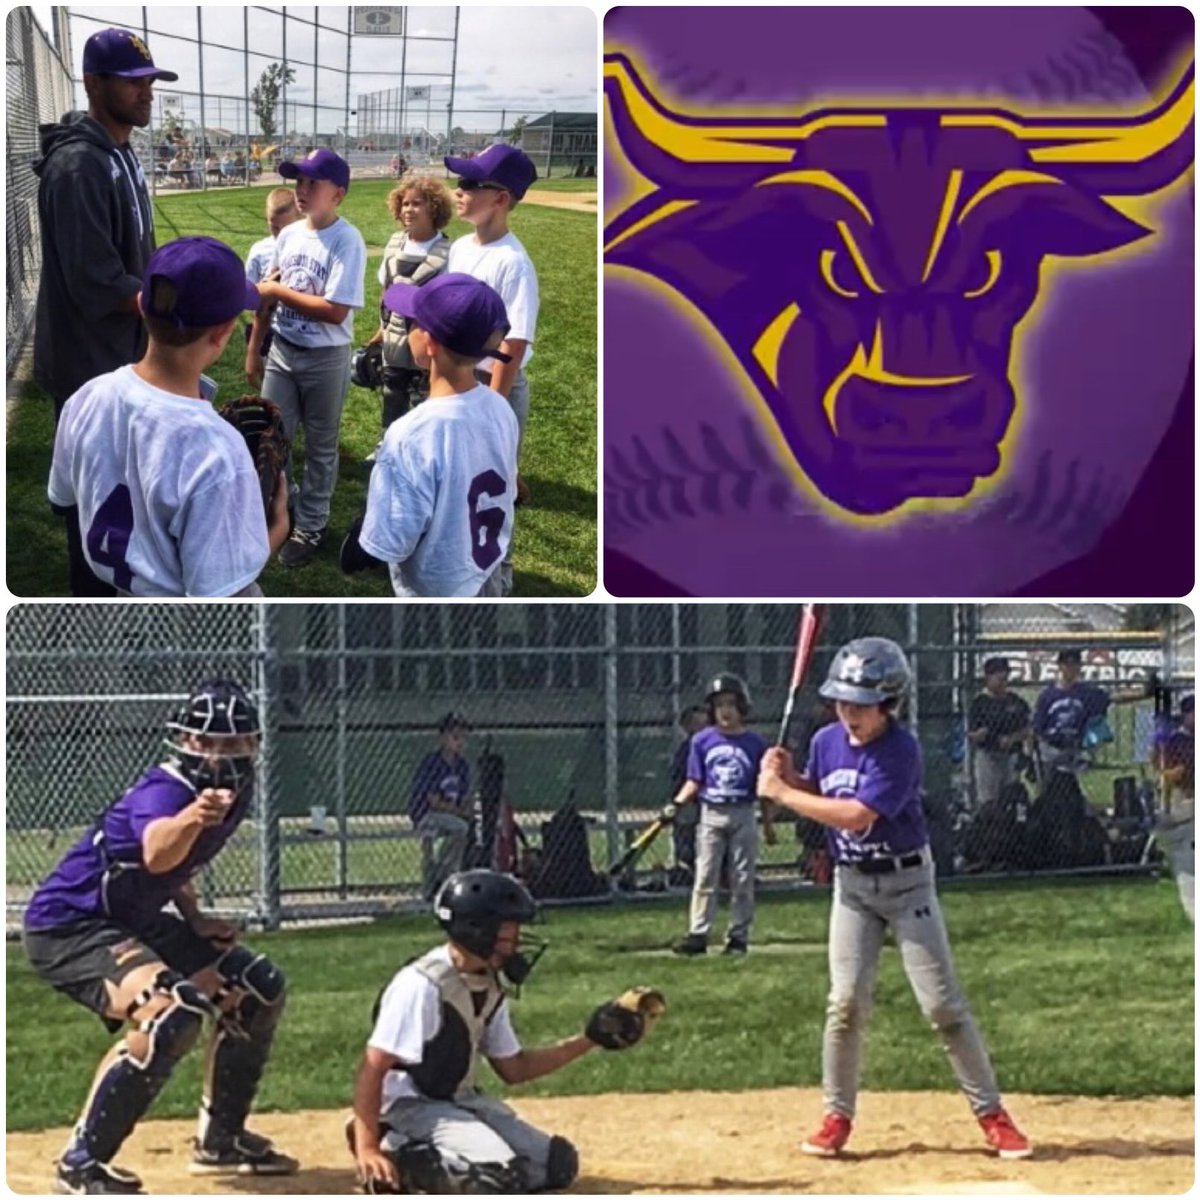 ⚾️MSU Youth Fall Ball⚾️ Registration is still open at all age levels for both team and individual sign ups secure2.mnsu.edu/eventsconferen… 2 games each Sun (Sept 11, 18, 25) We have availability for: *2 more teams at 10U *1 more team at 11U *2 more teams at 13U